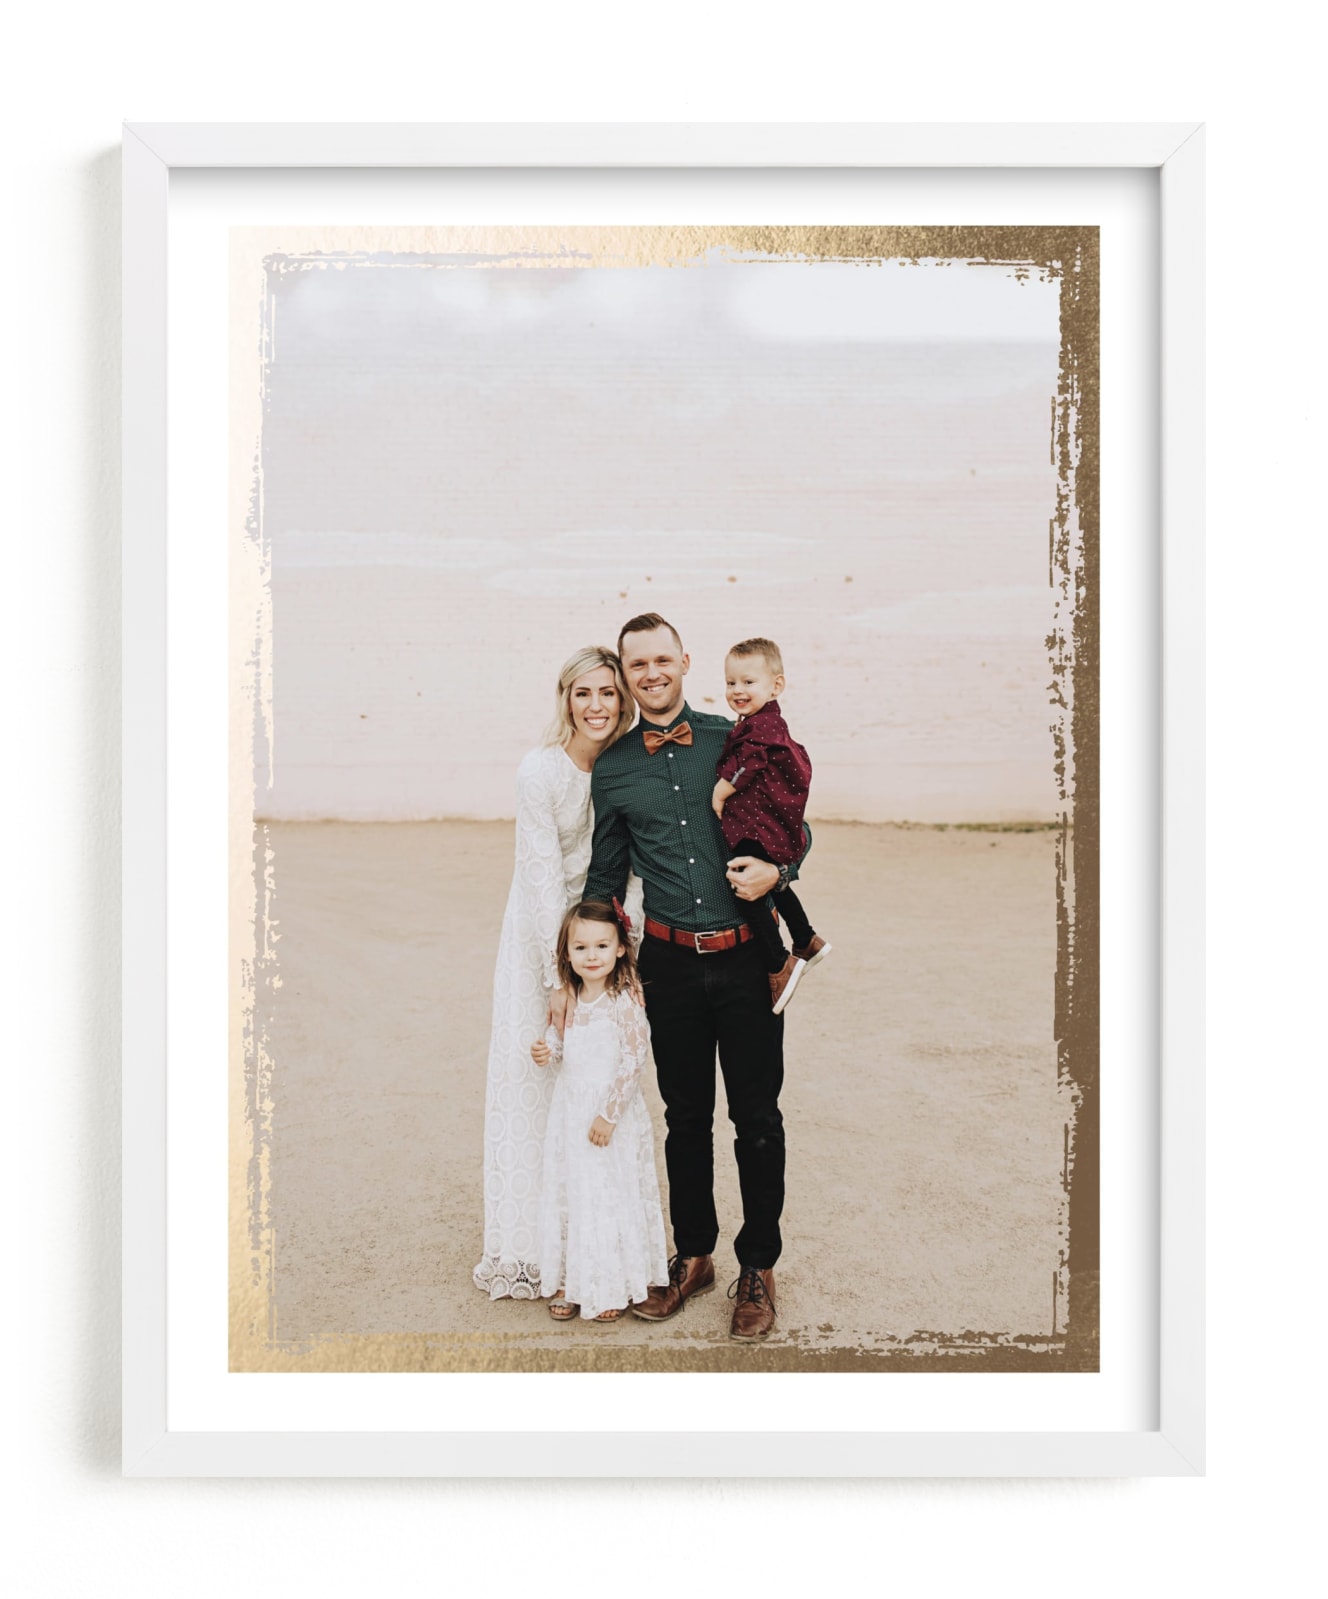 This is a gold foil stamped photo art by cambria called Rustic Edges.